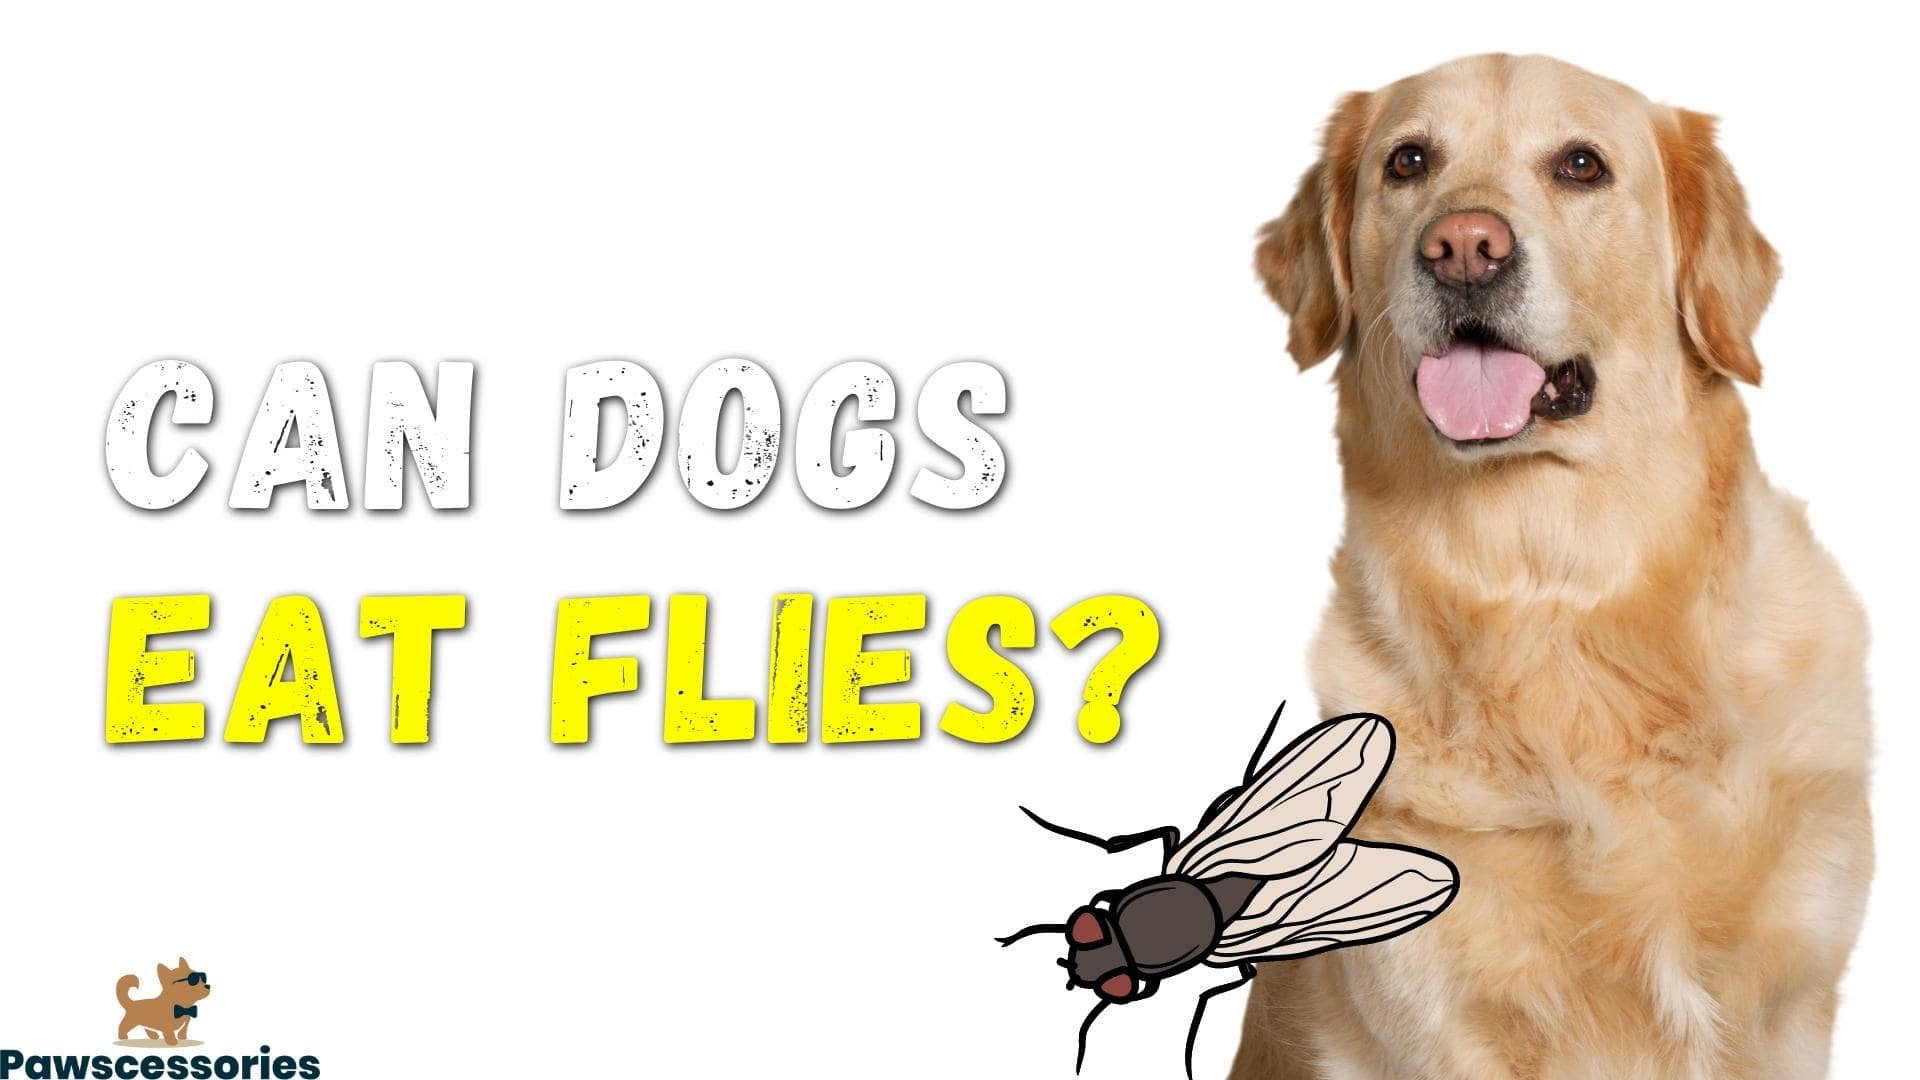 My Dog Loves Flies: Is That Safe? Can Dogs Eat Flies?